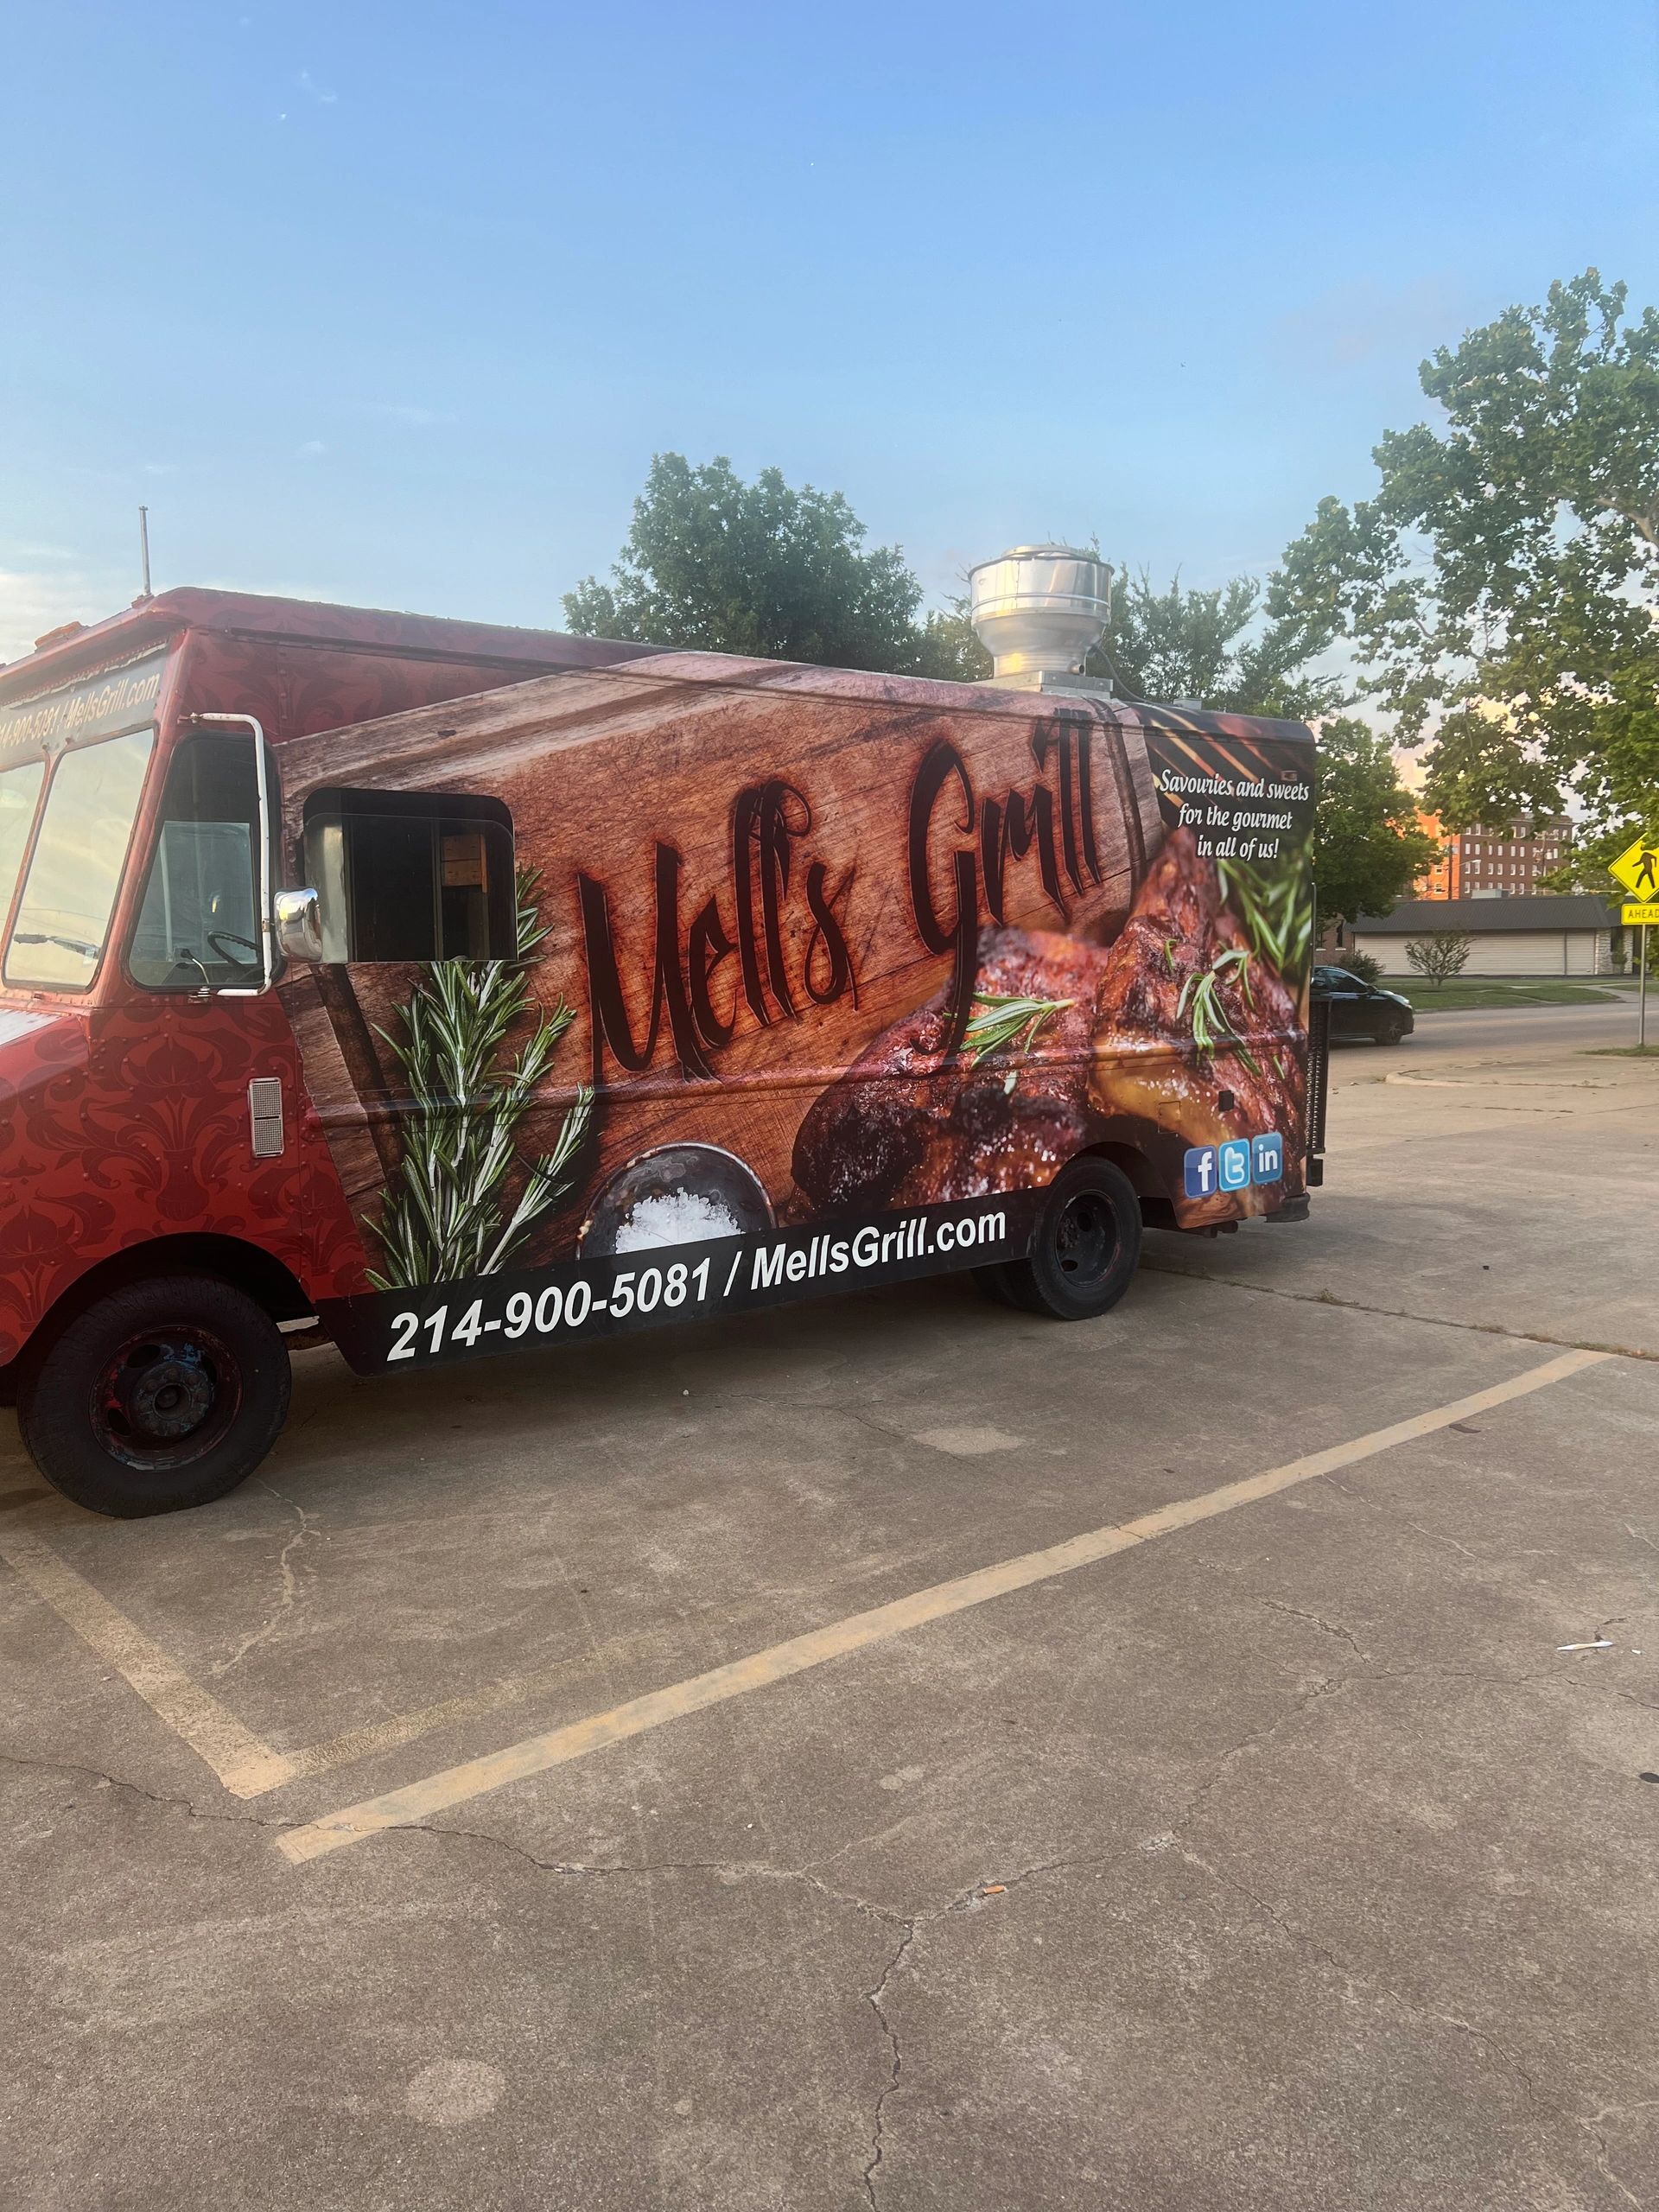 Call today for soul Food on wheels! Oxtails, Smoothed pork chops, Mac & Cheese Collard Greens etc…